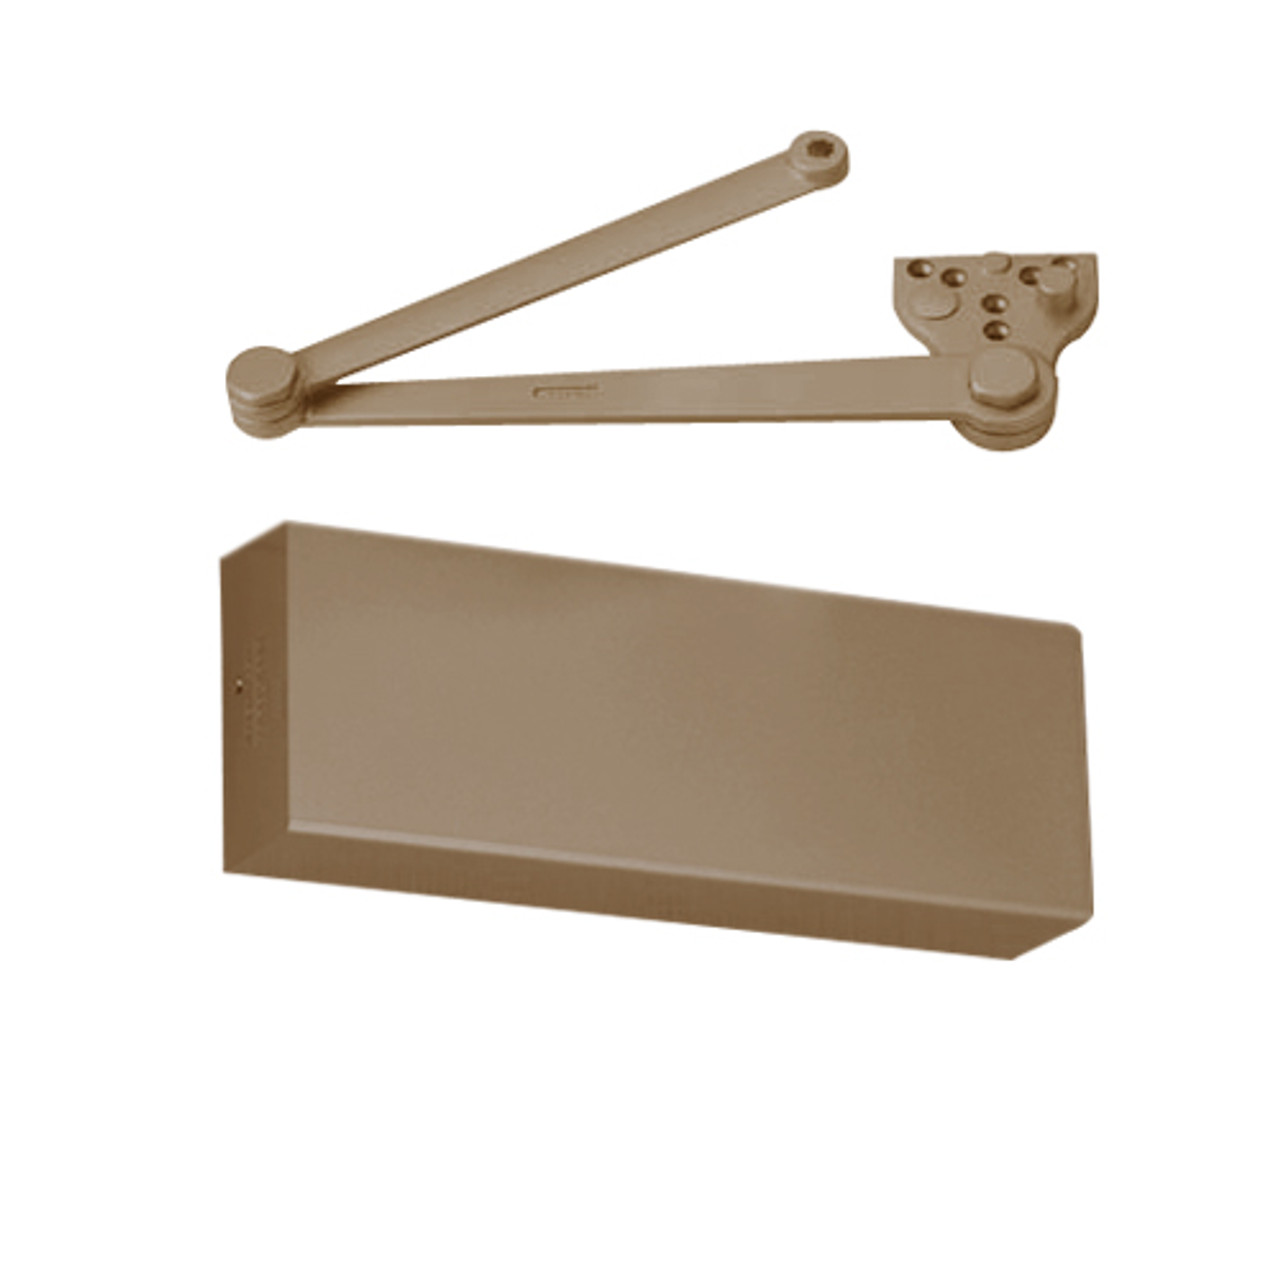 CLP9500-691 Norton 9500 Series Non-Hold Open Cast Iron Door Closer with CloserPlus Arm in Dull Bronze Finish